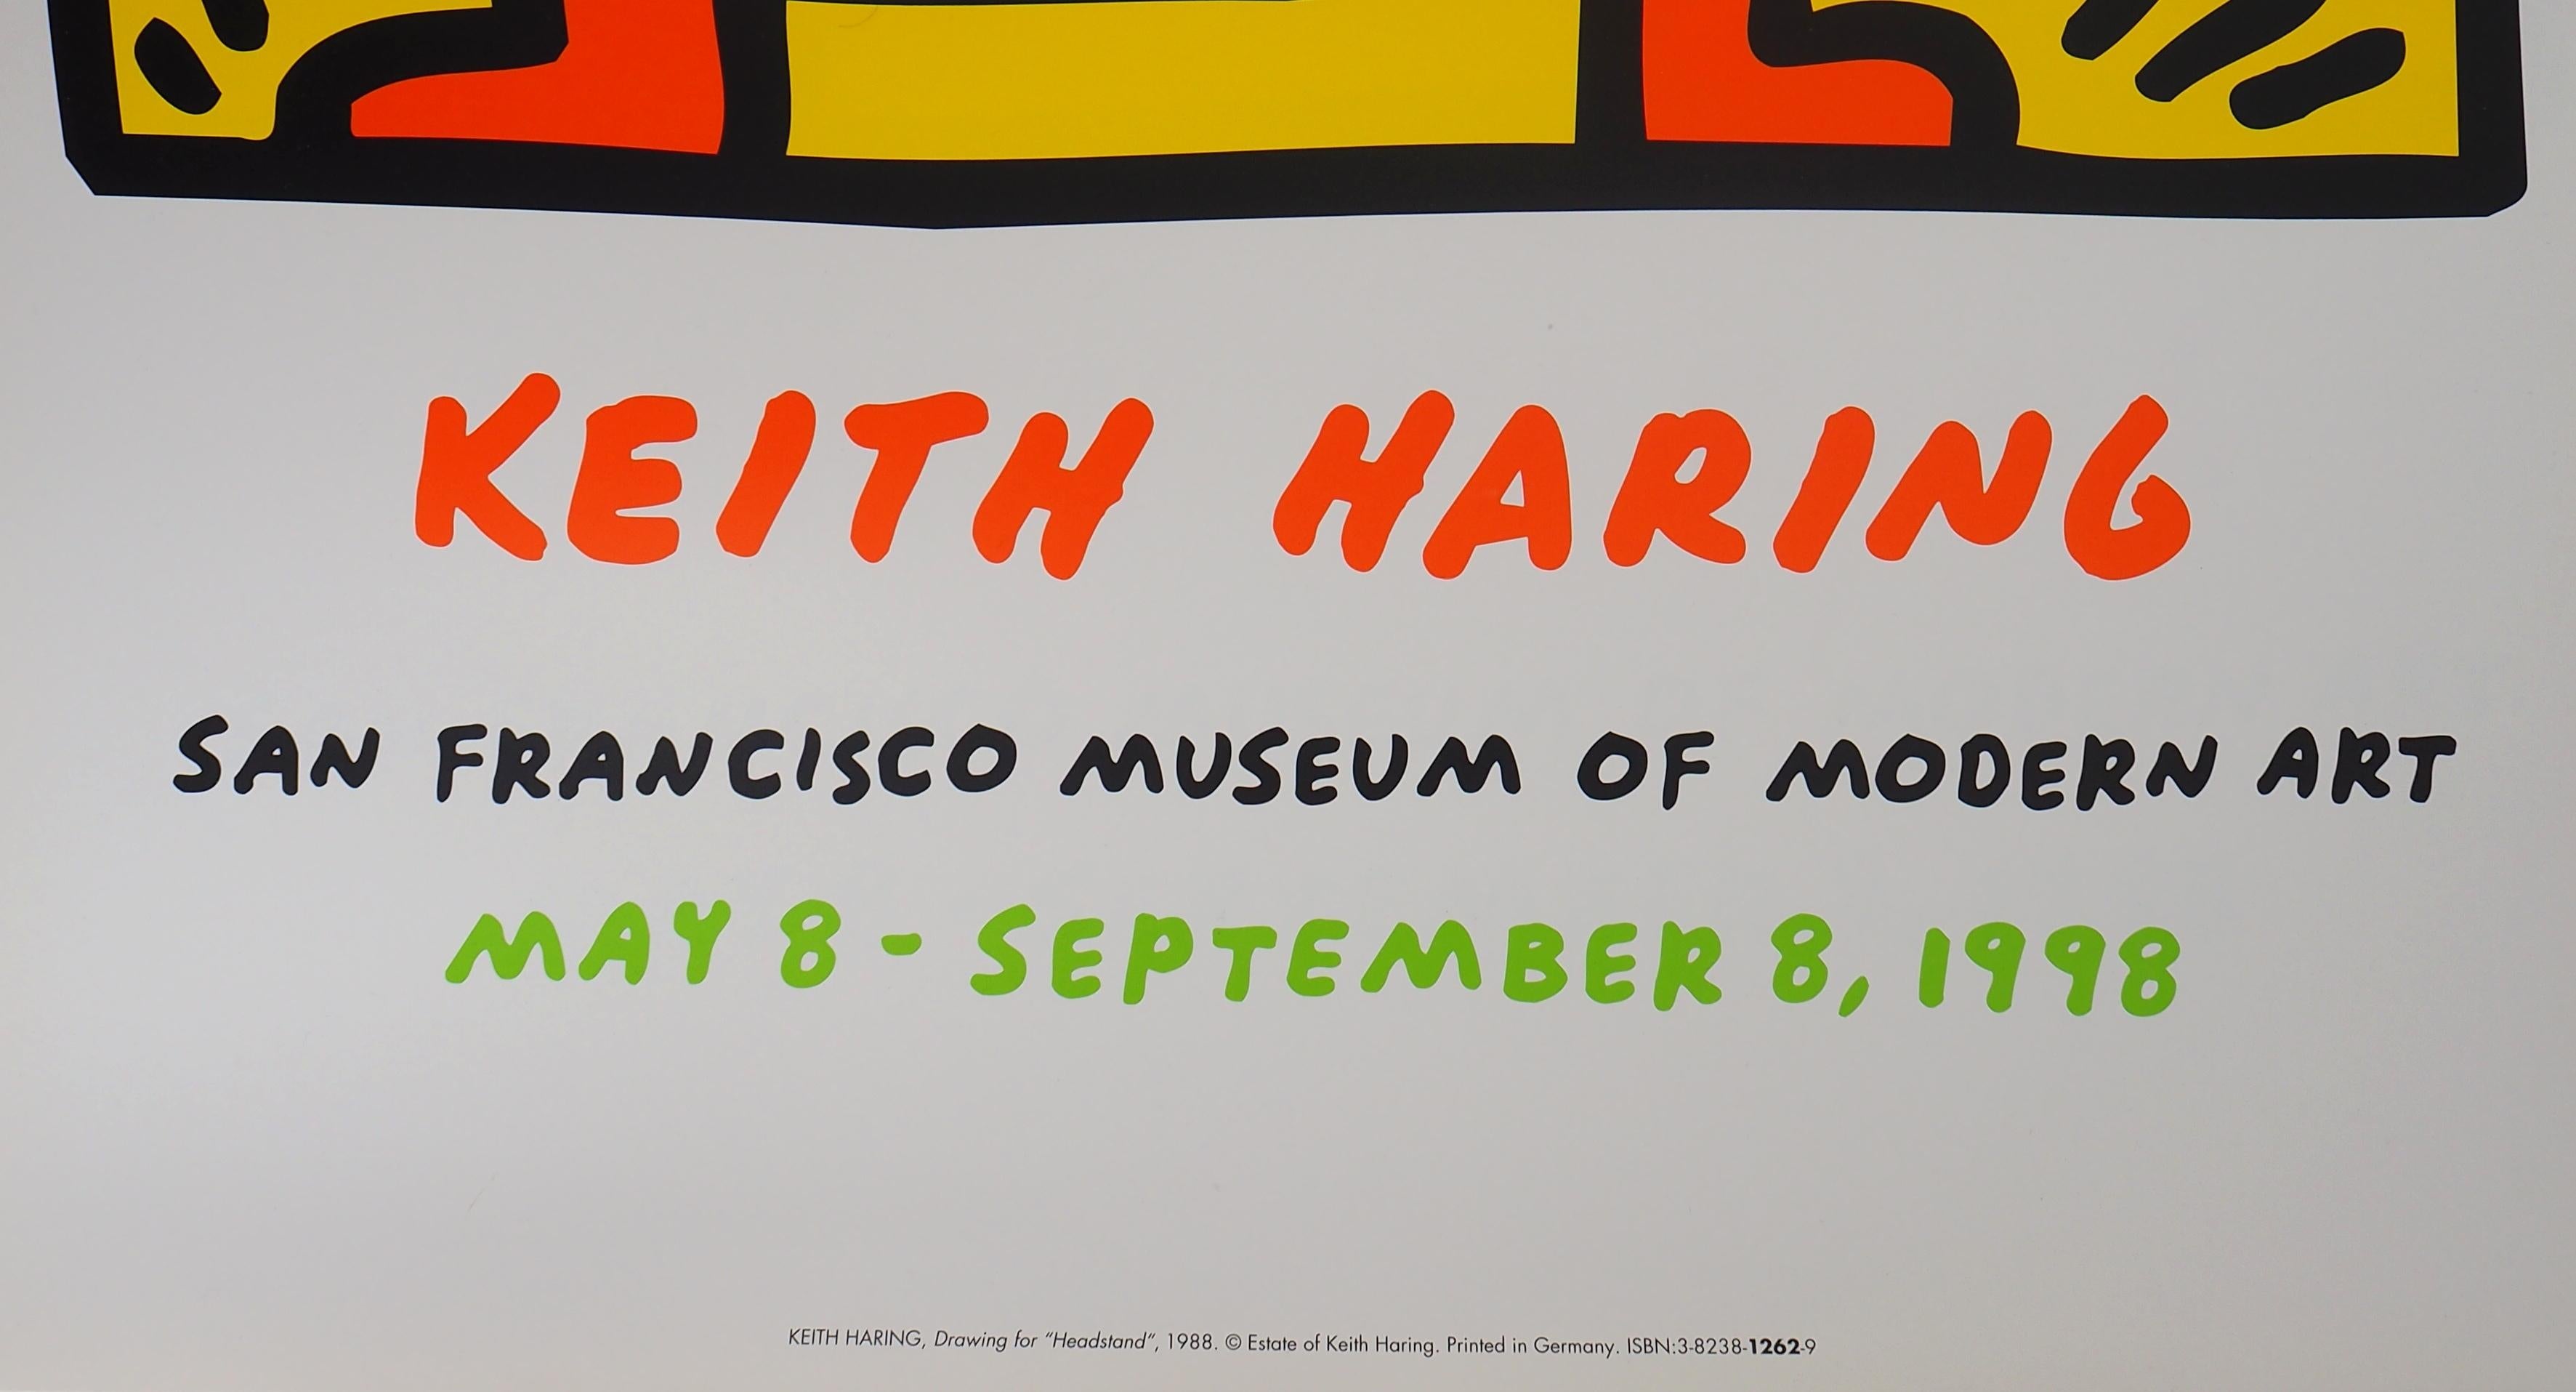 Keith Haring
Headstand

Original vintage exhibition Poster printed in Screenprint
On thick paper
90 x 60 cm (c. 36 x 24 in)

INFORMATION: Official screenprint poster for the Haring exhibition at San Francisco Museum of Modern Art in 1998. Original